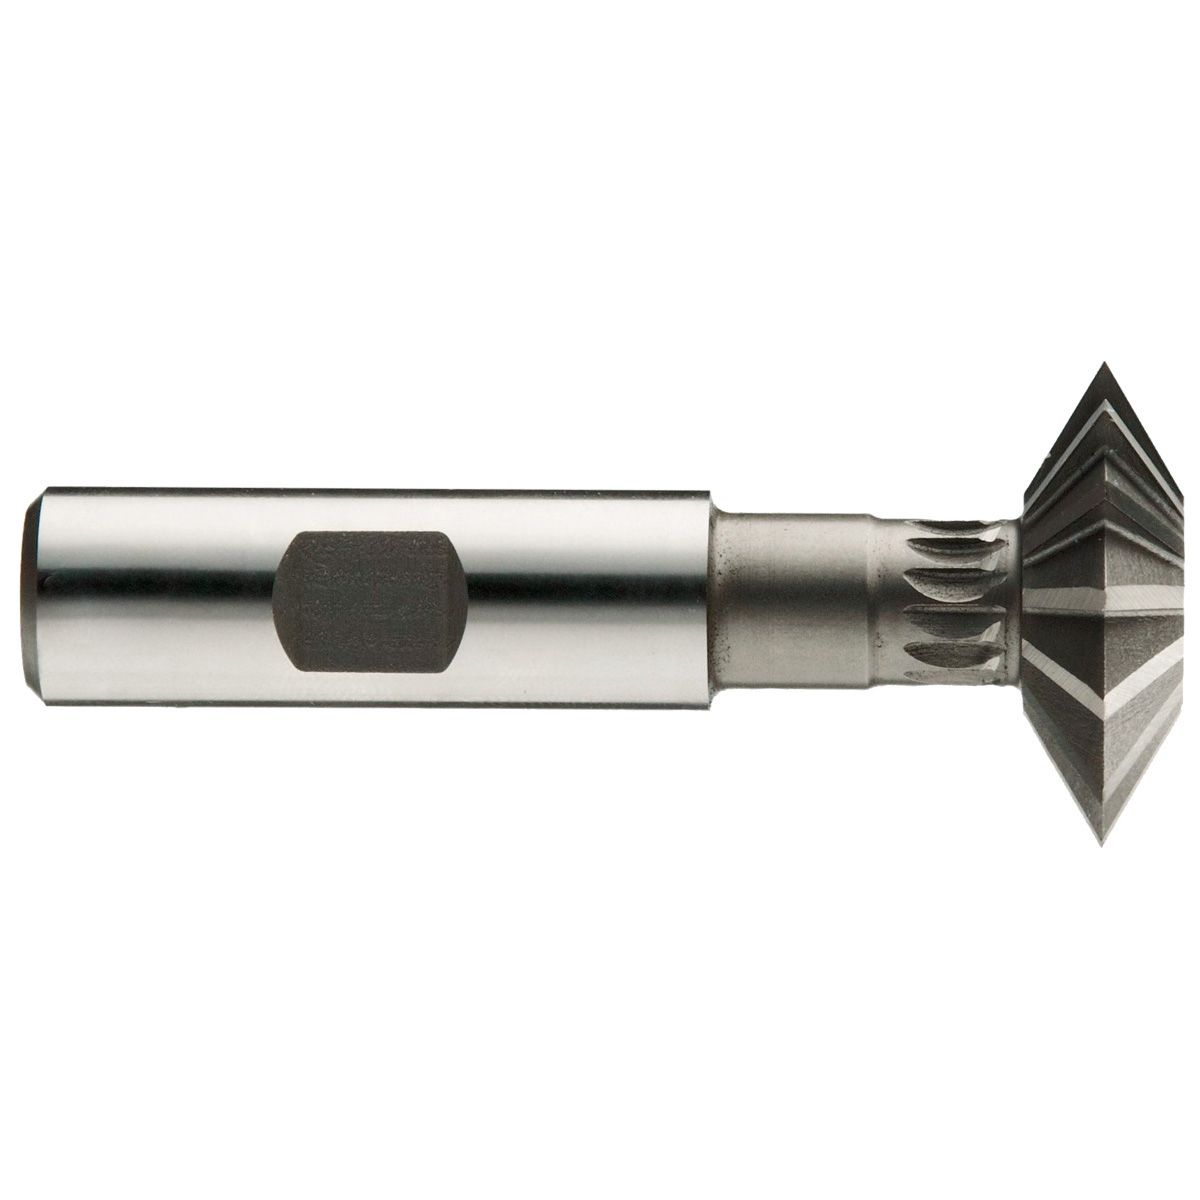 3/4 X 3/16 X 3/8 X 2-3/8 60 DEGREE M42 8% COBALT DOUBLE ANGLE CUTTER (2006-0301)